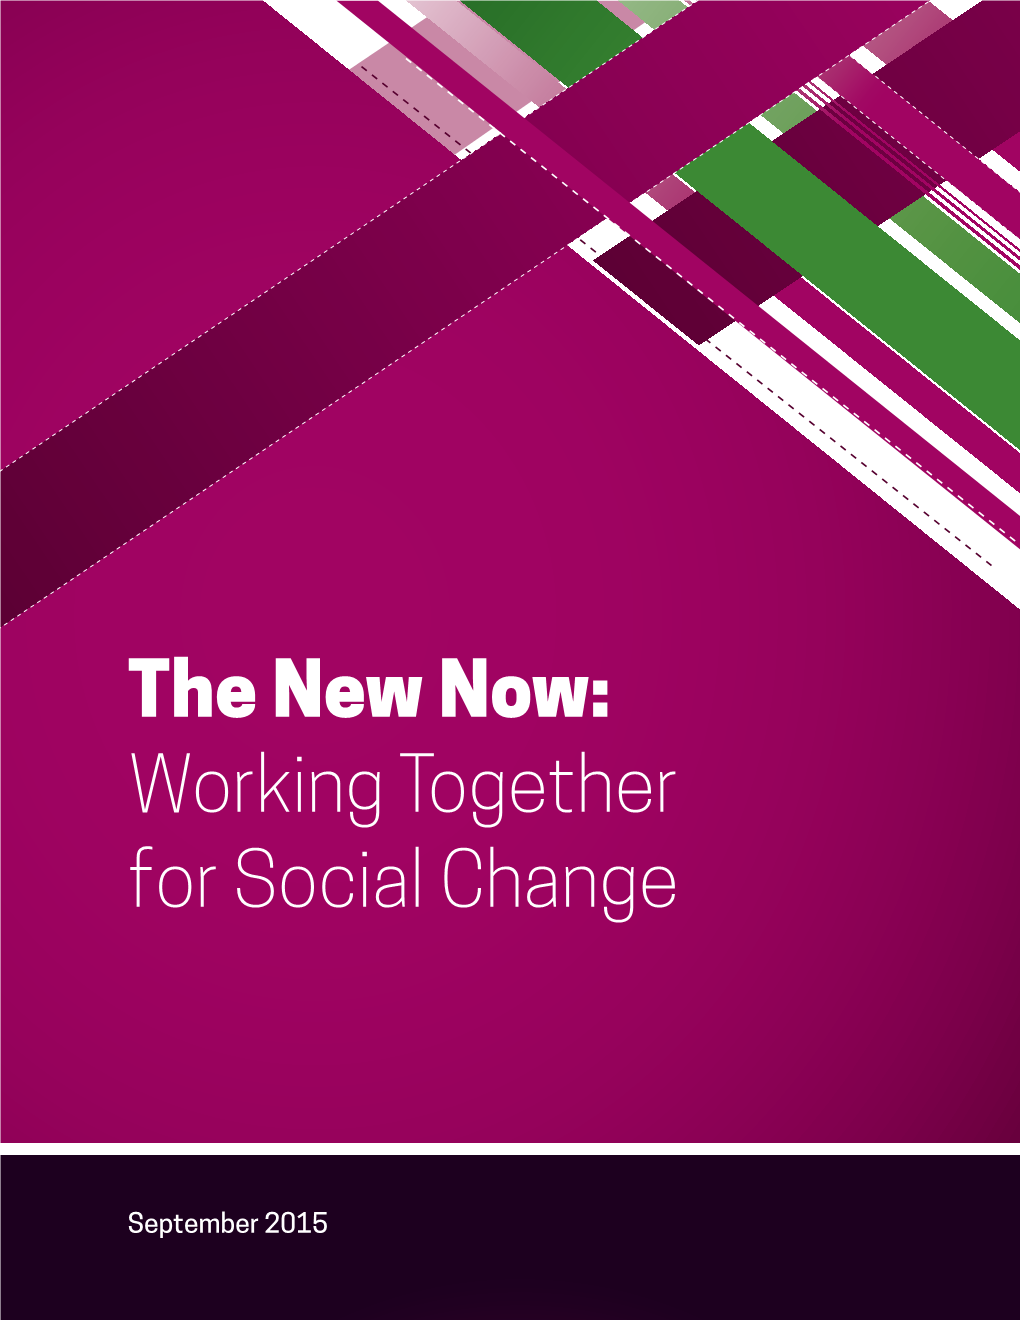 The New Now: Working Together for Social Change